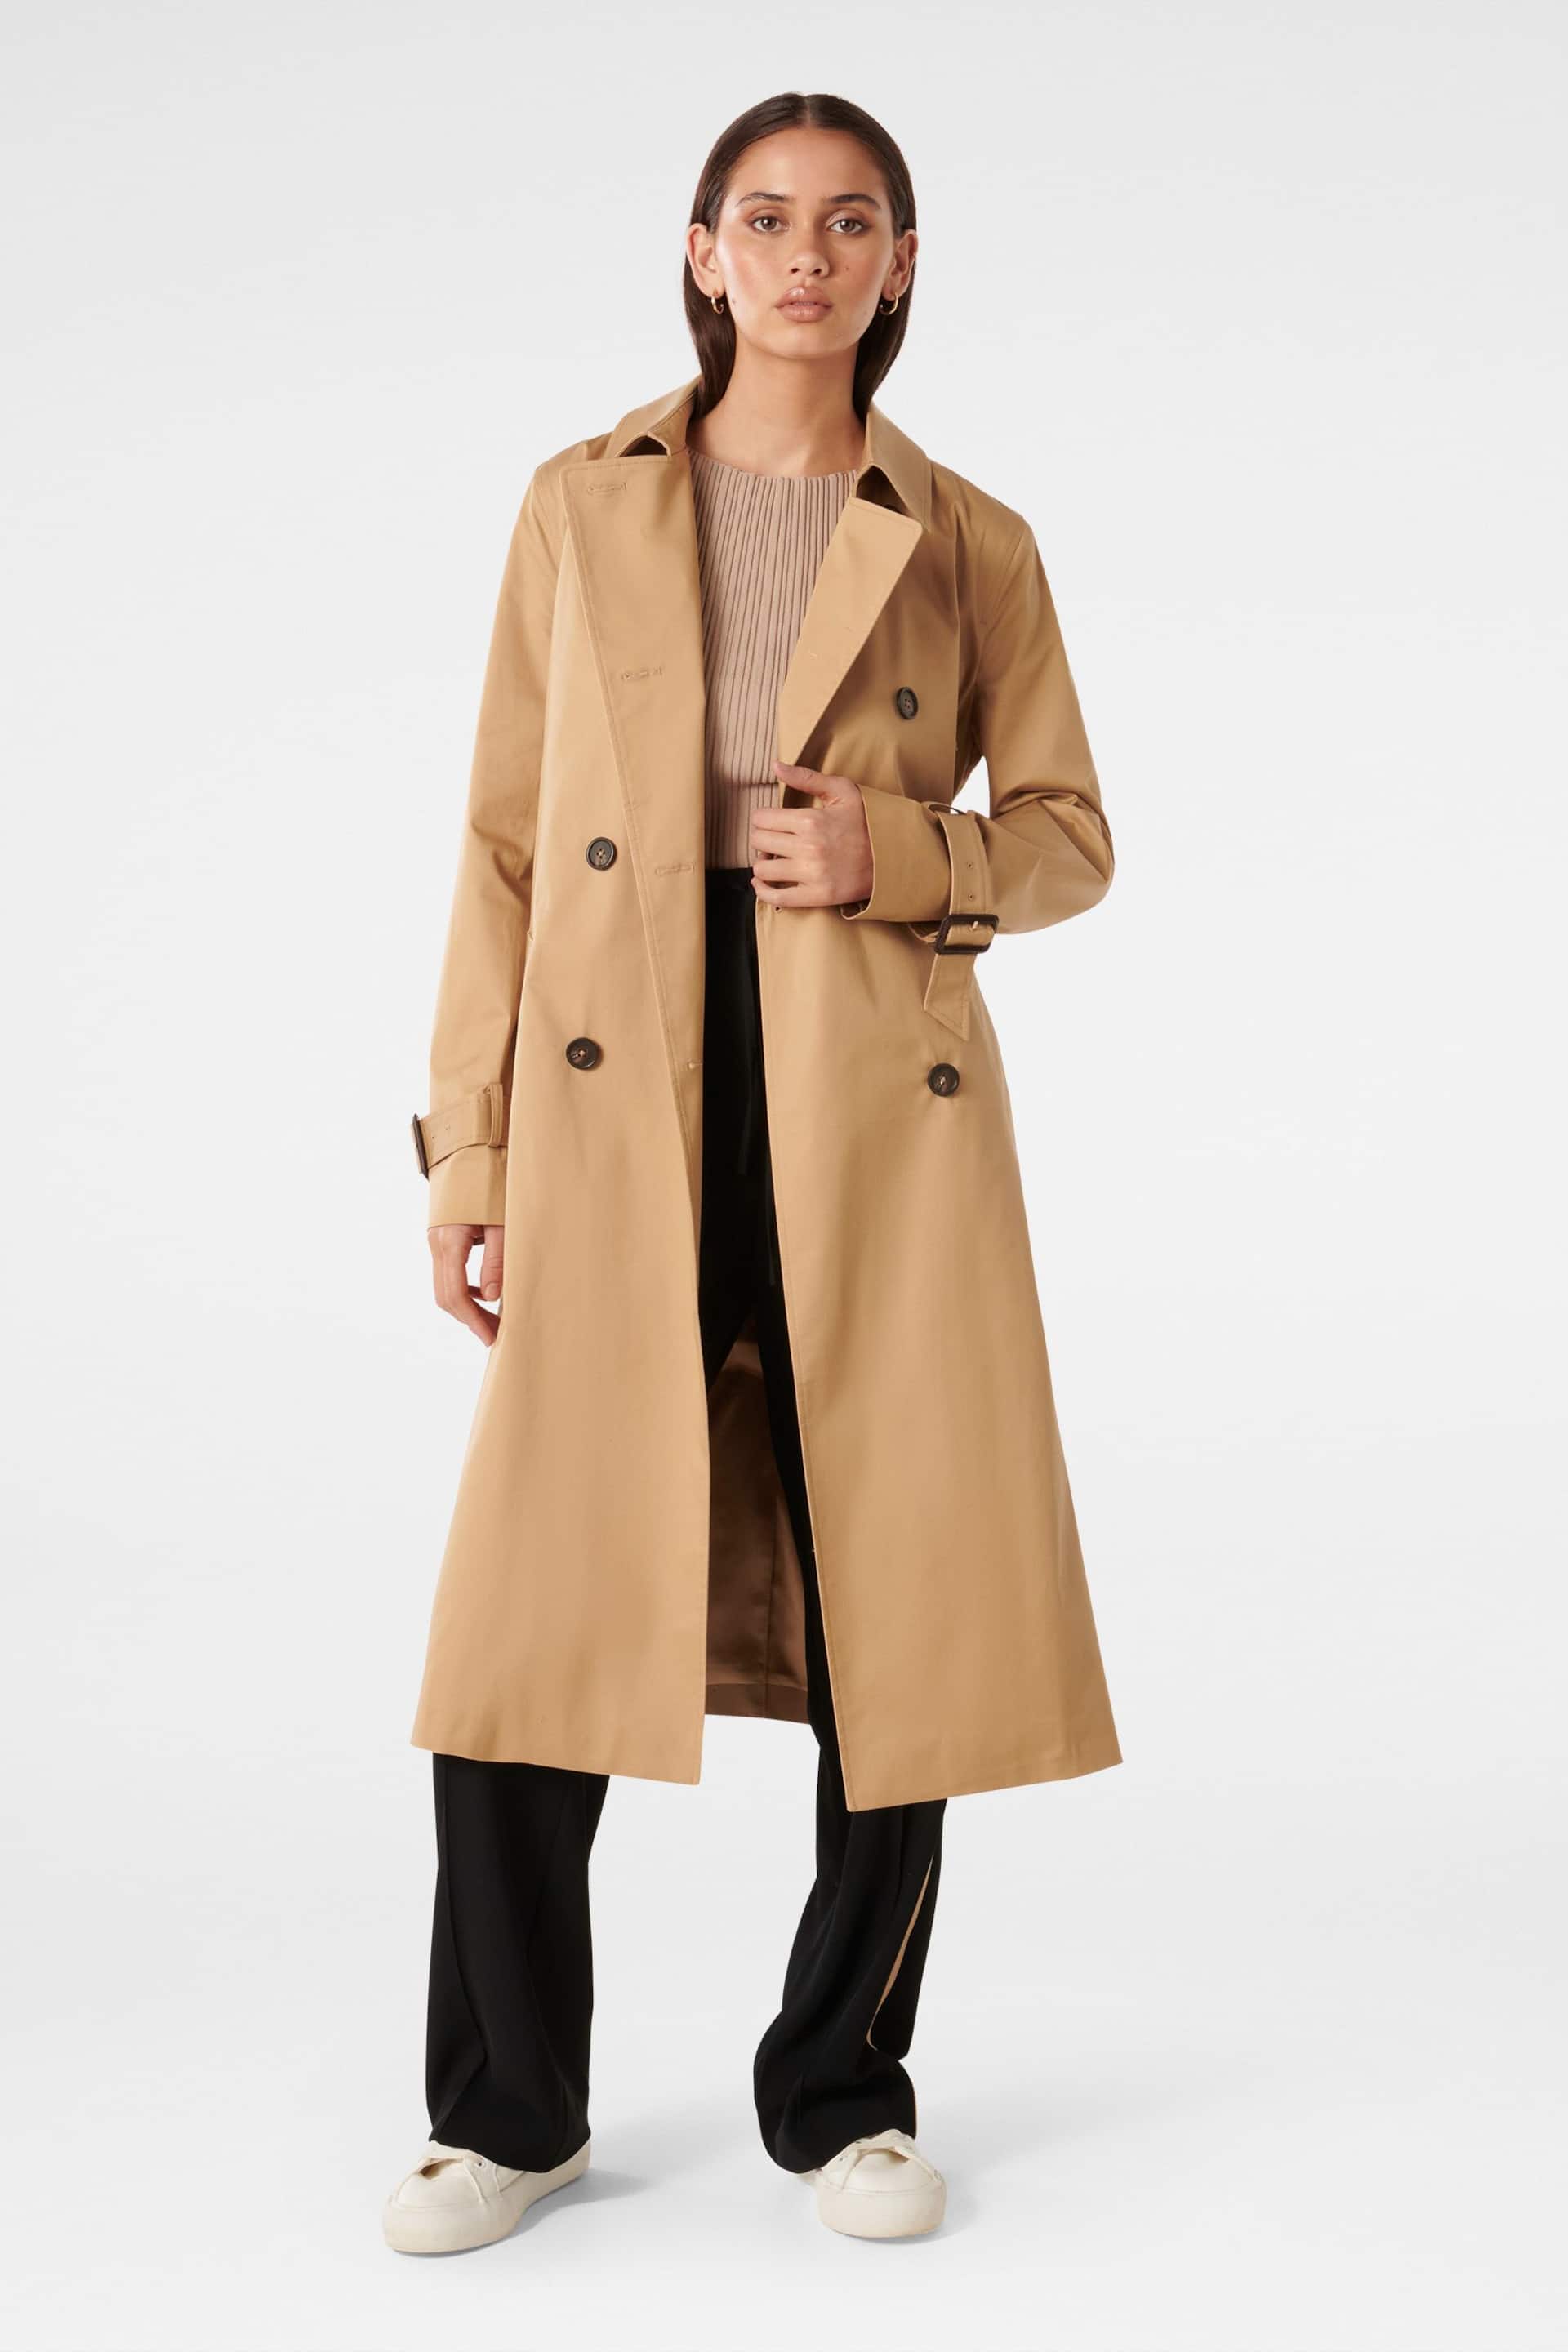 Forever New Animal Jacinta Classic Trench Coat - Image 1 of 4